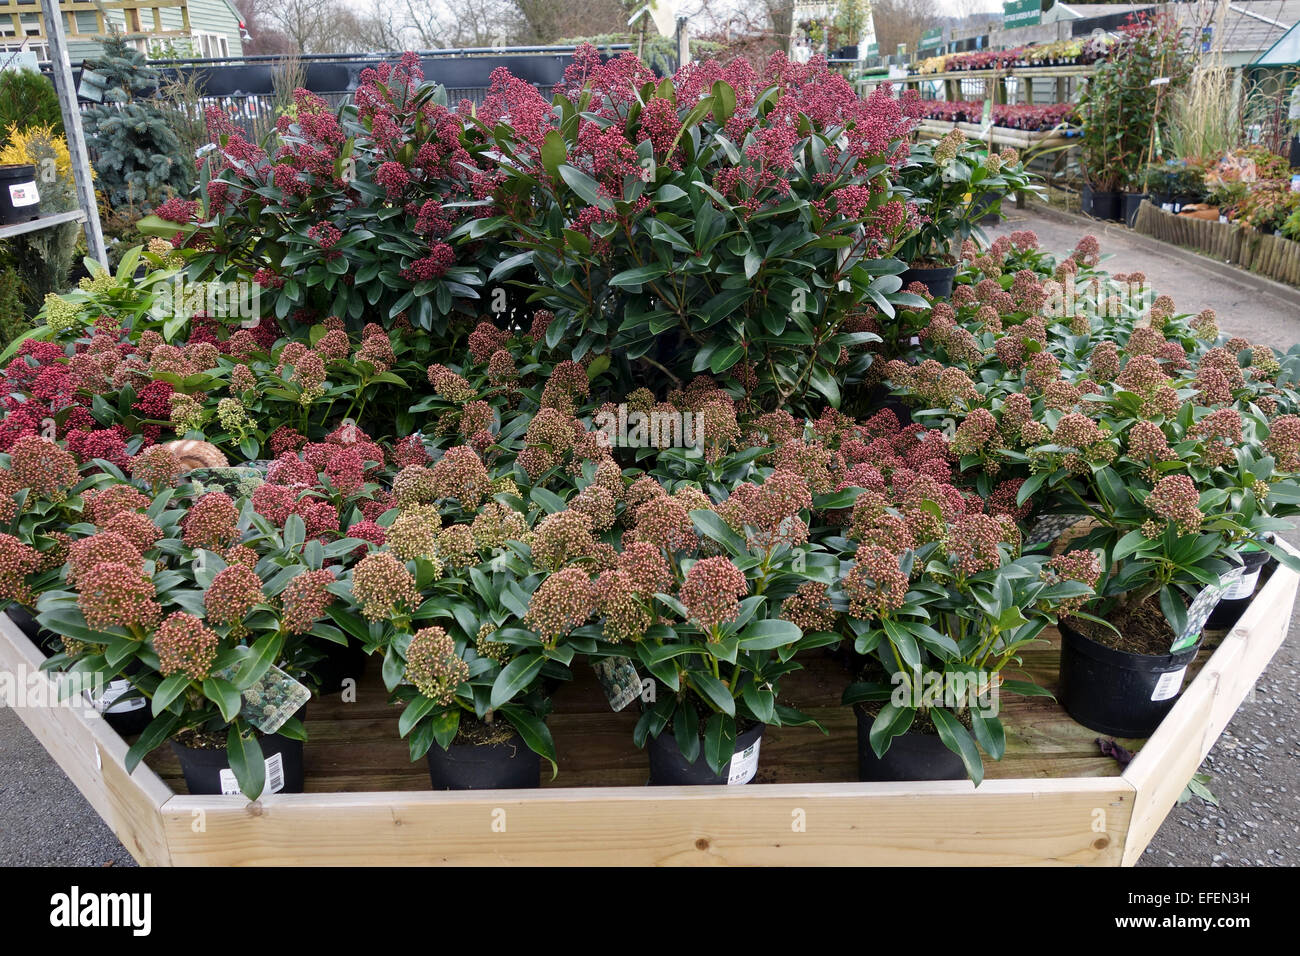 Skimmia japonica 'Rubella' & 'Fragrant Cloud' for sale at a garden centre in the UK Stock Photo